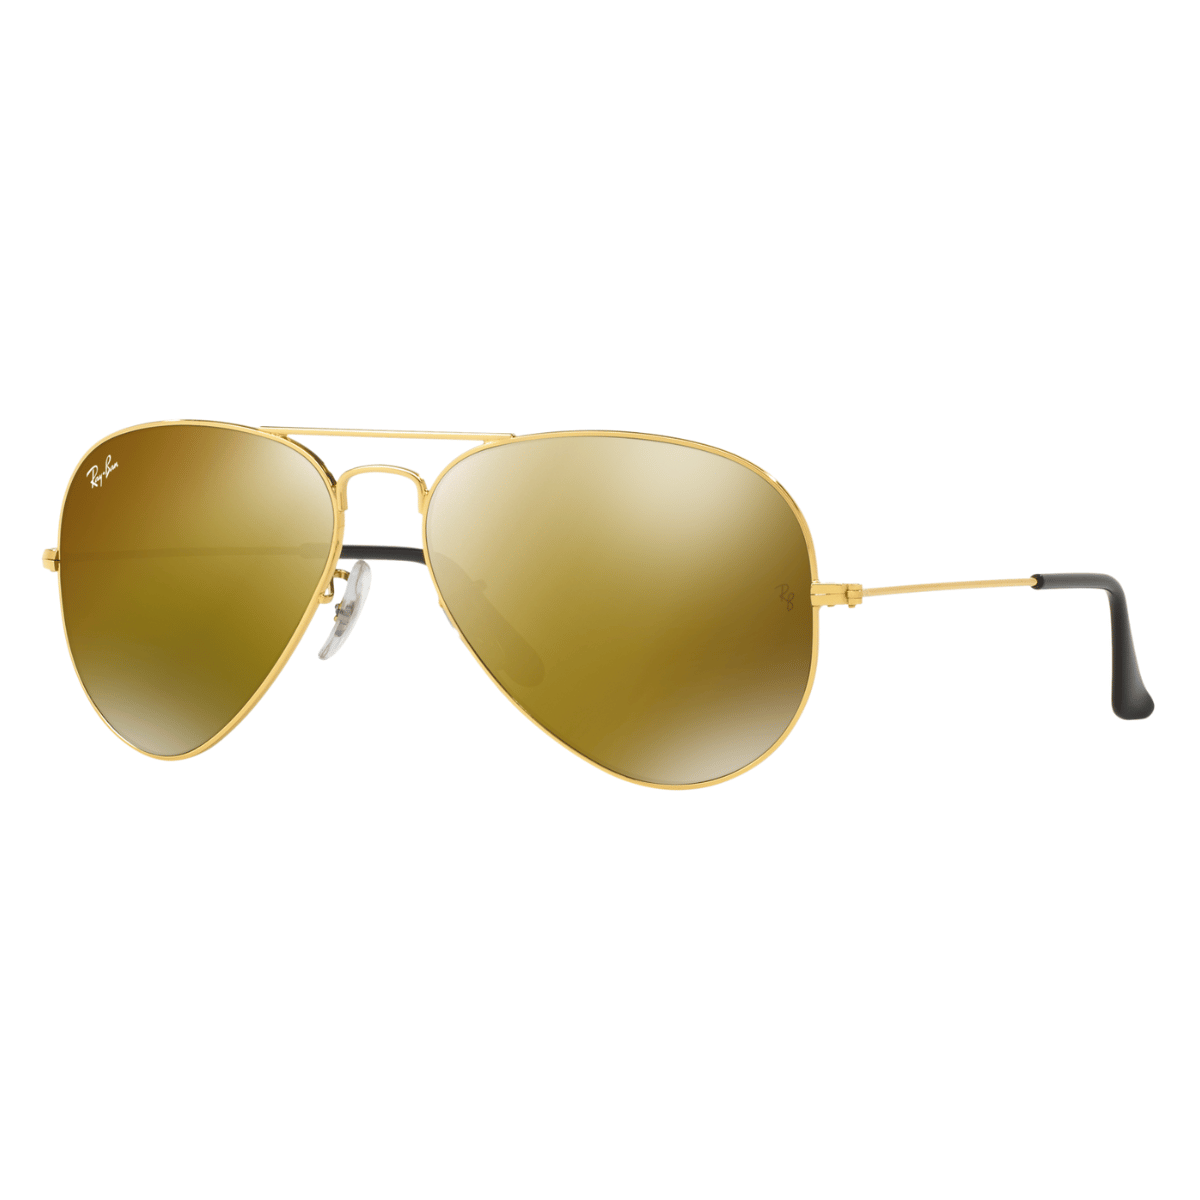 "Shop Ray-Ban Aviator Mirror Sunglasses: Update your look with iconic RB3025I W3276 58 Gold Green Mirror Gold sunglasses for men and women. Classic pilot frame in gold with green mirror gold lenses, perfect for any occasion."